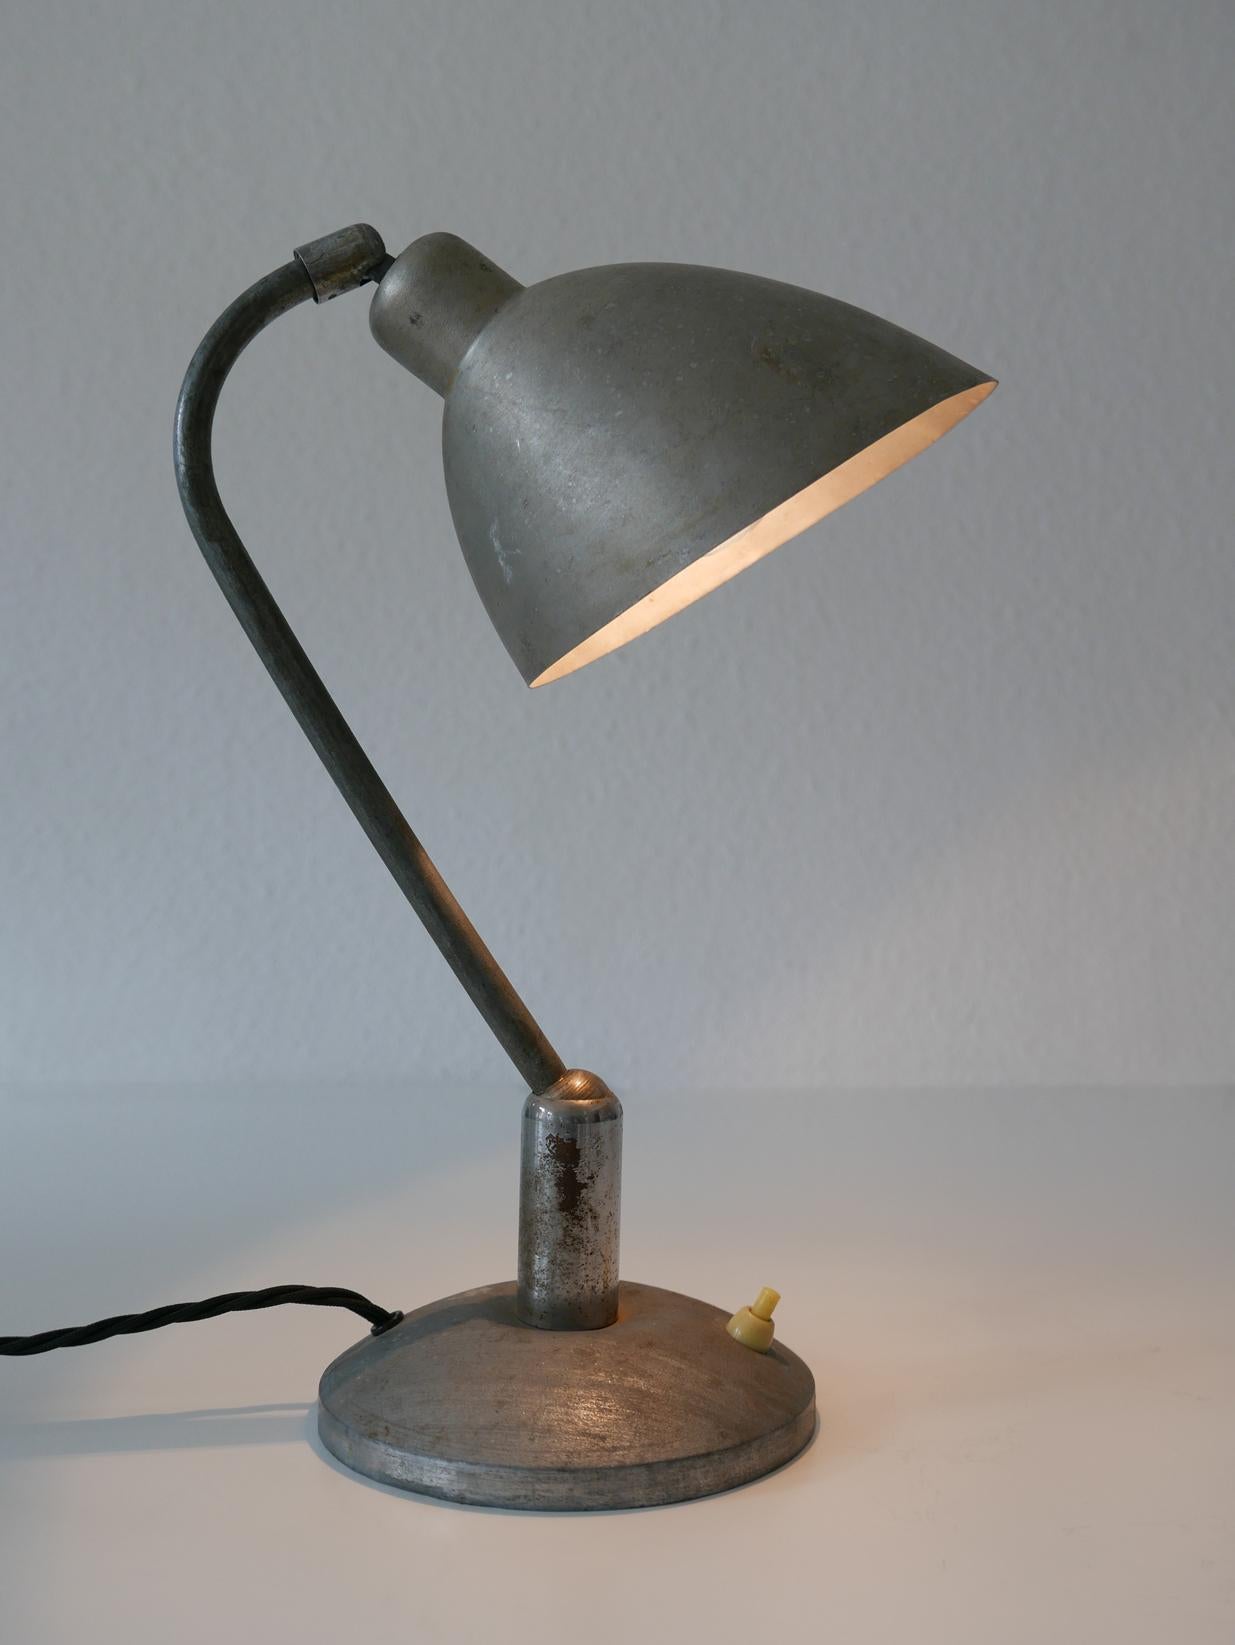 Rare Czech Functionalist or Bauhaus Table Lamp by Franta ‘Frantisek’ Anyz, 1920s For Sale 1